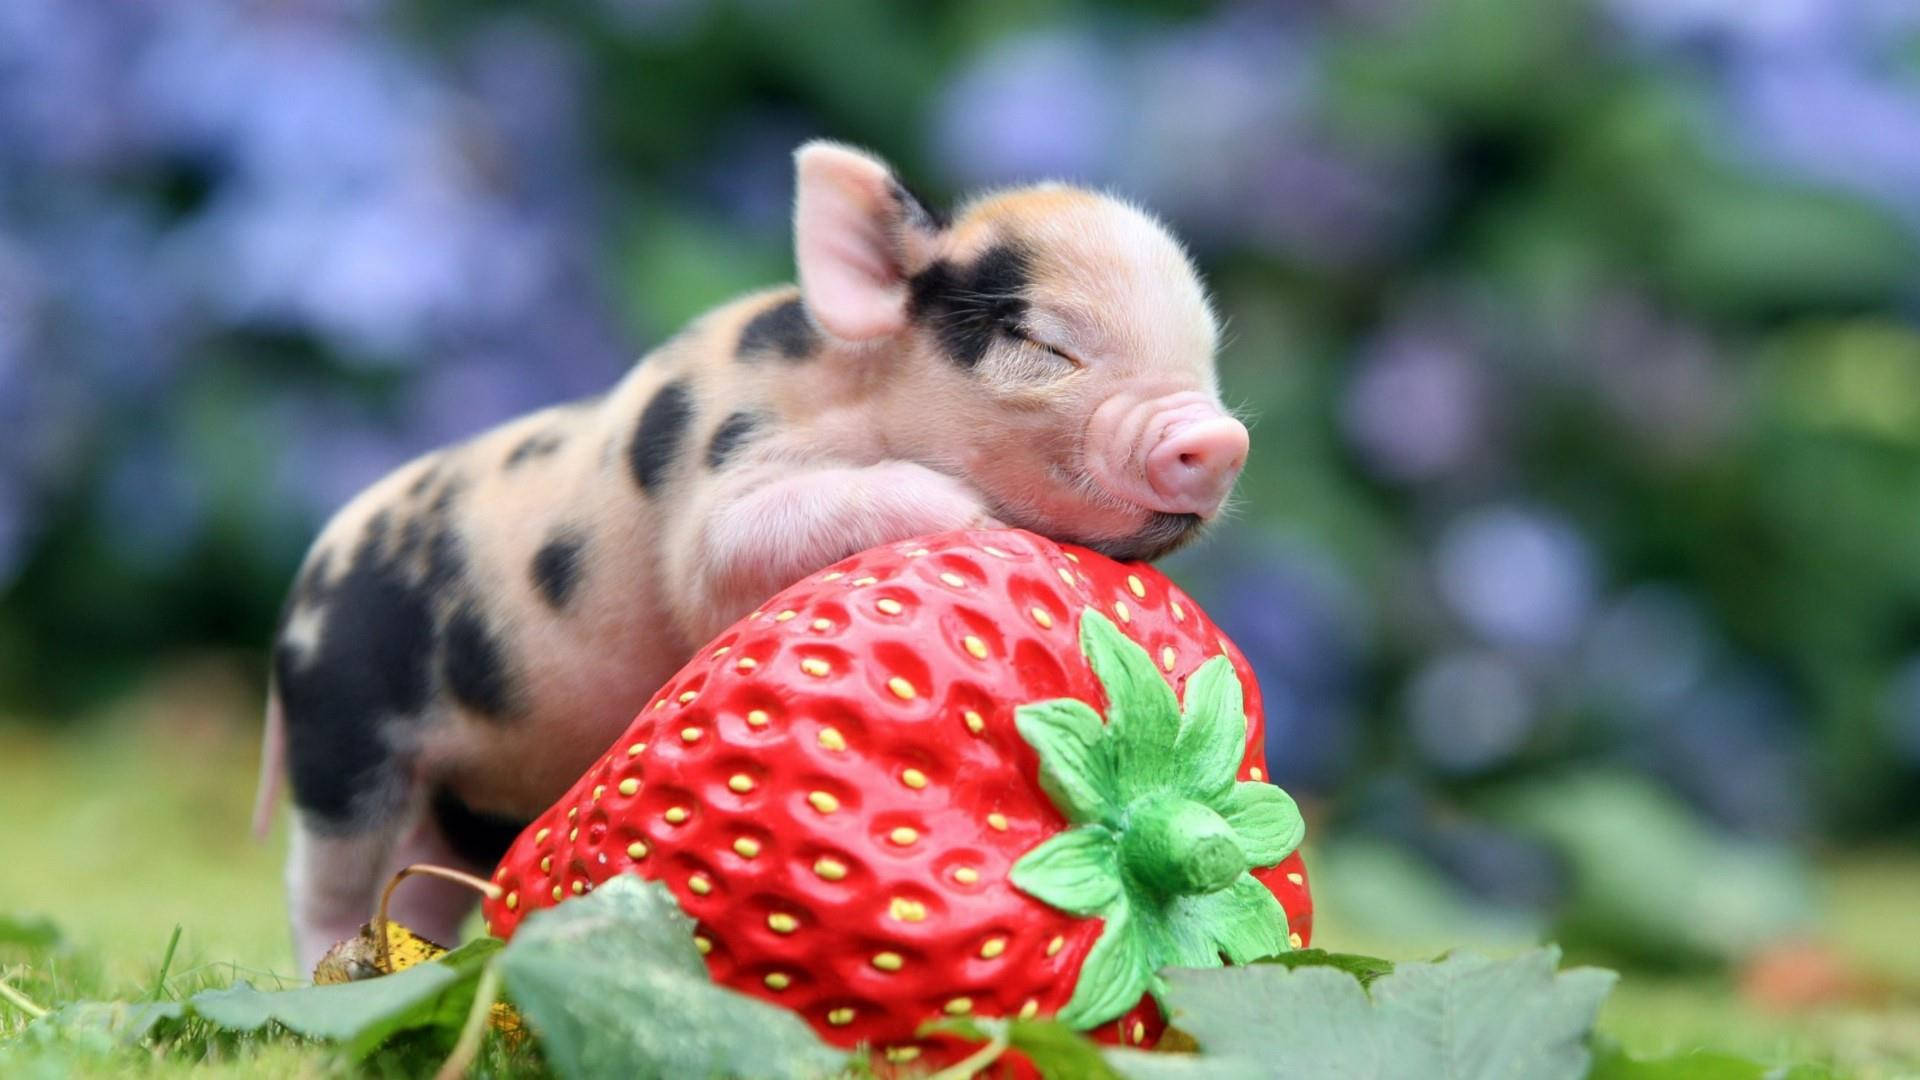 Adorable Piglet Resting In A Field Background